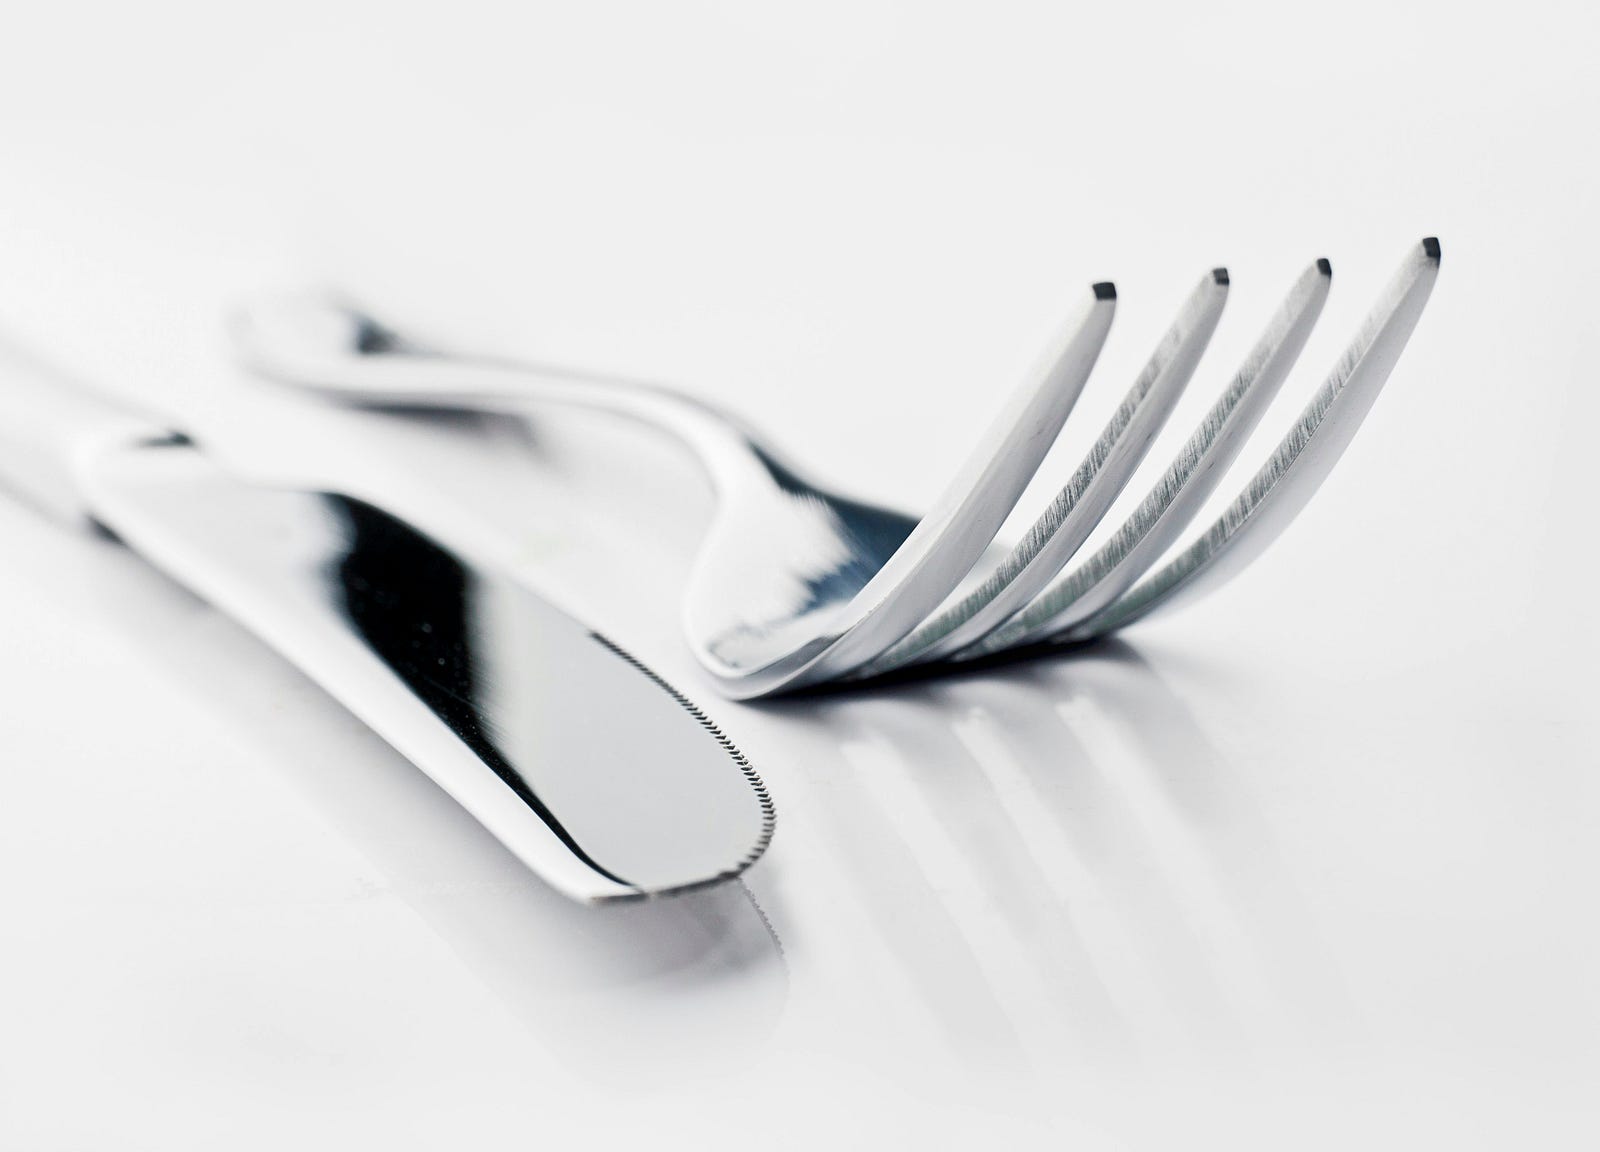 A fork and a knife seen in close-up. The image is in black and white.